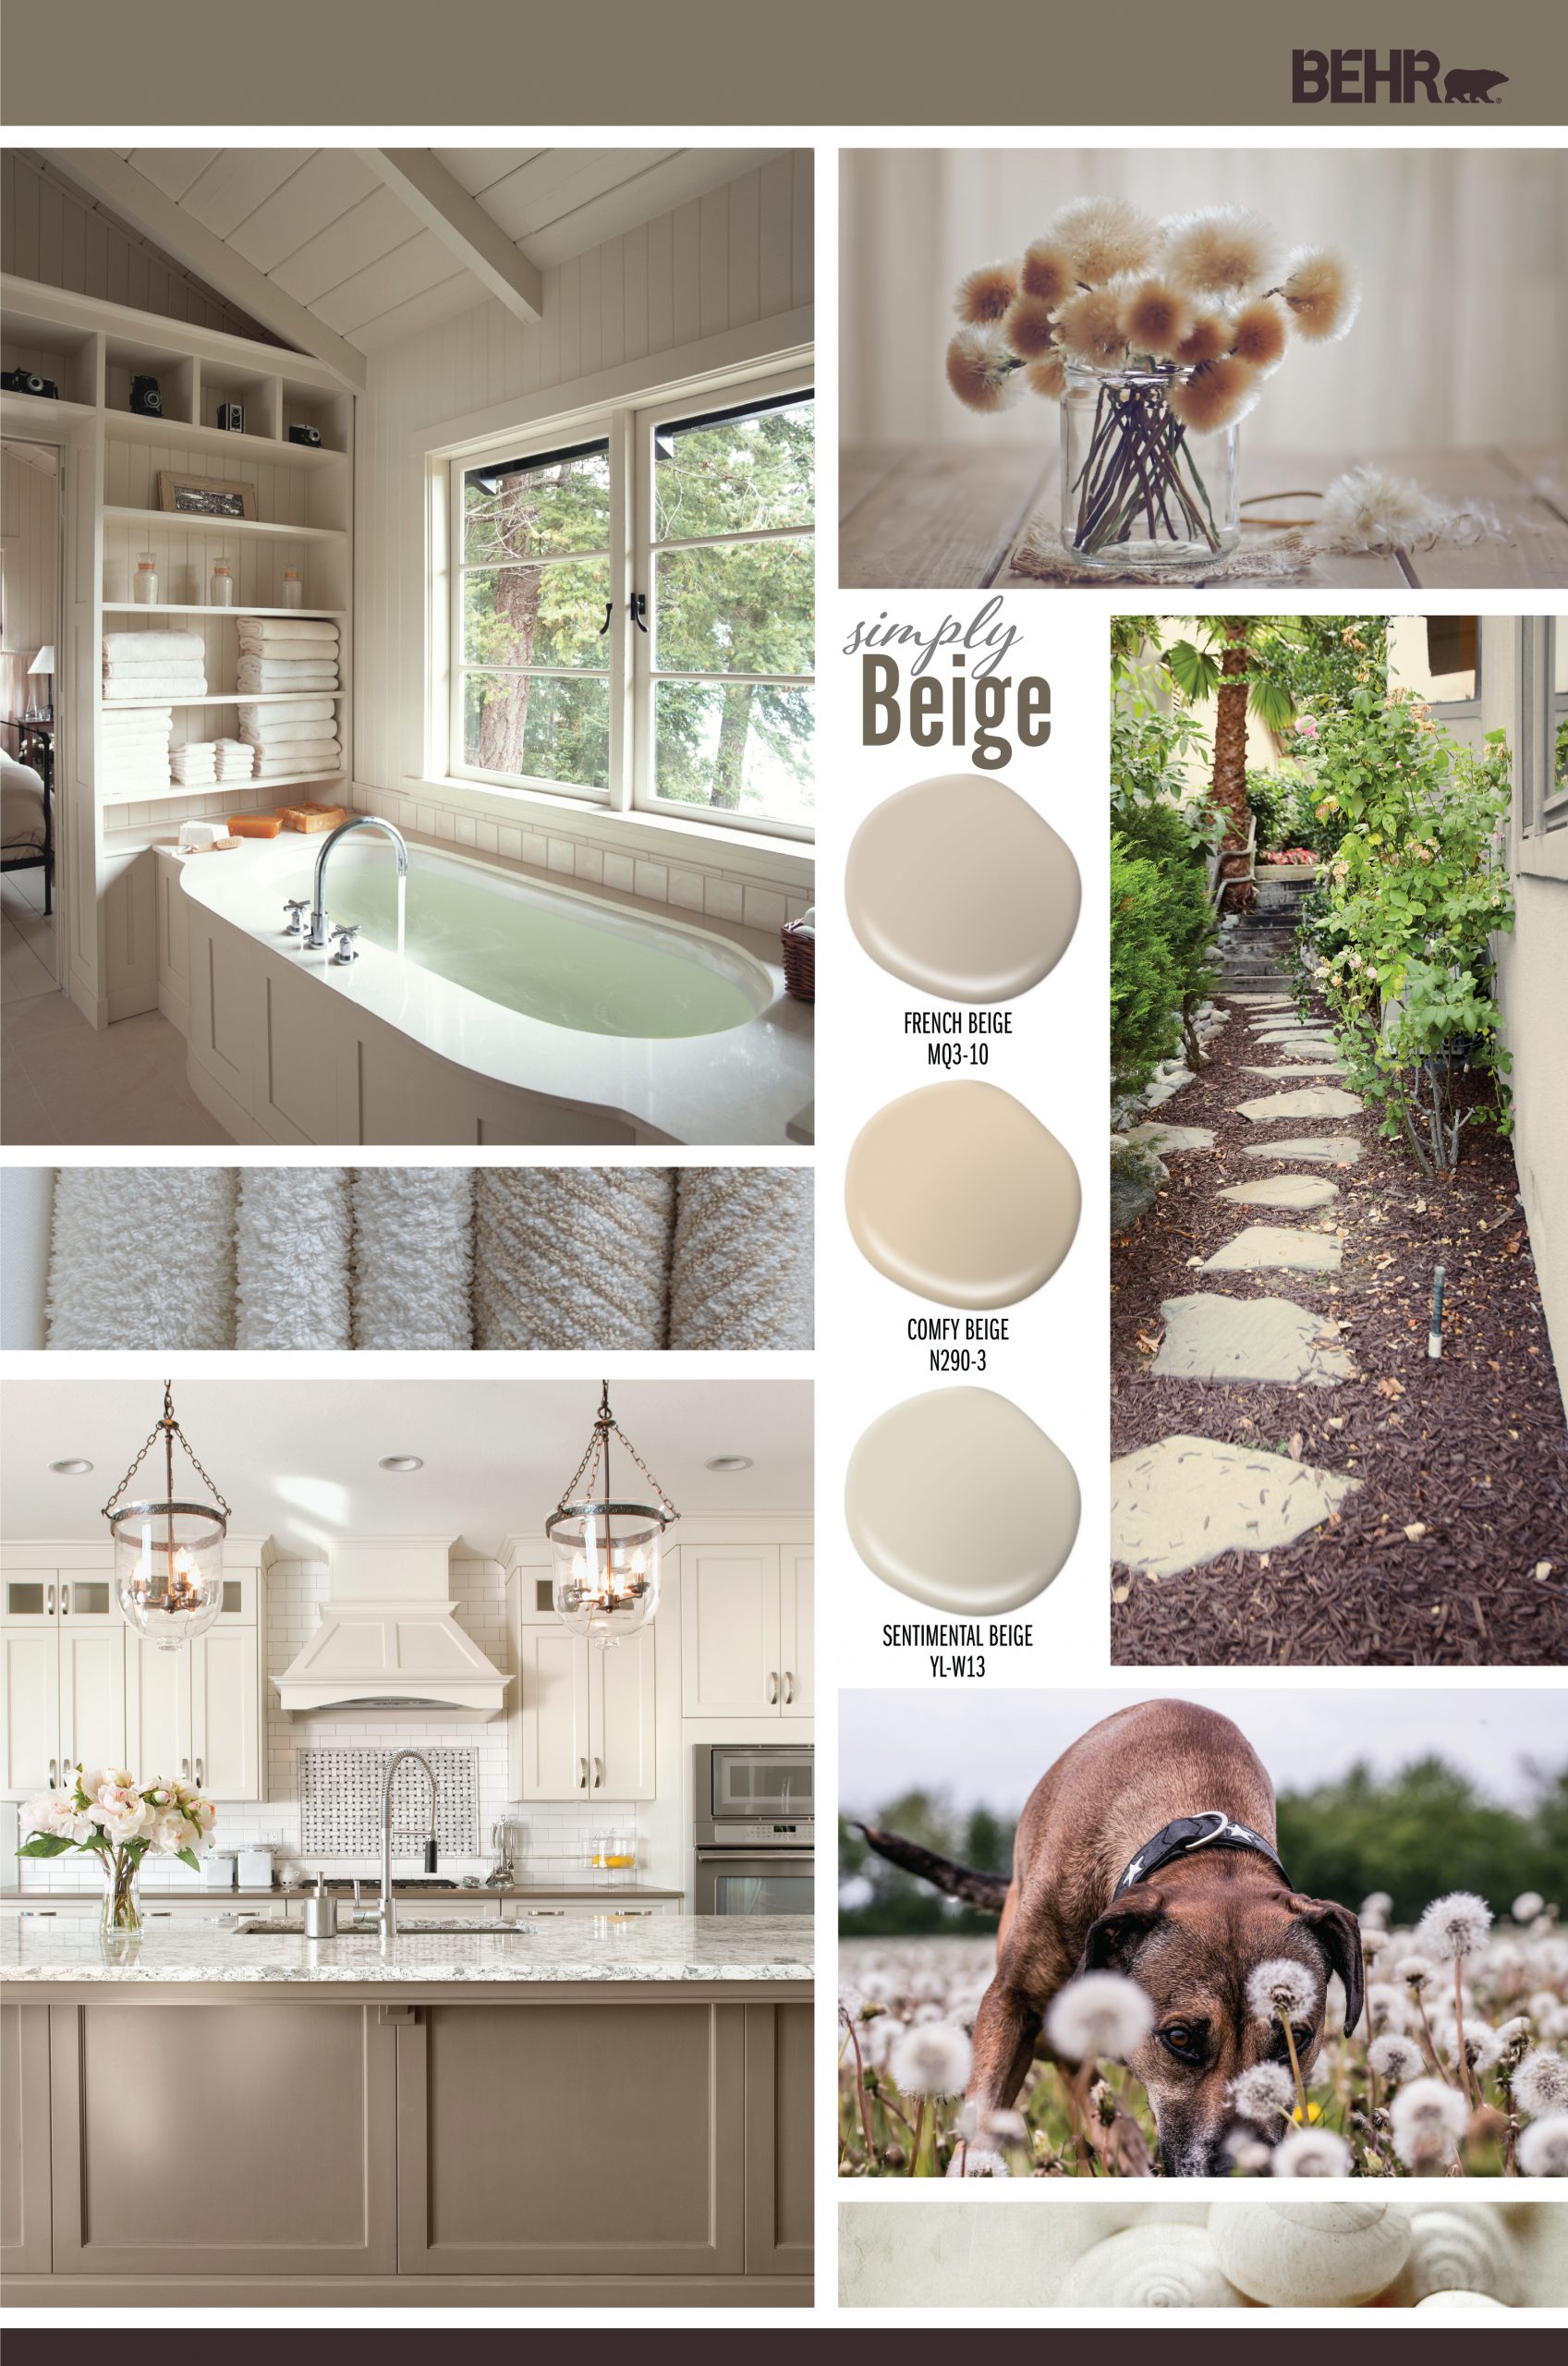 Inspiration Board featuring three beige paint drops: French Beige, Comfy Beige, Sentimental Beige Images shown are the following: -A bathroom with the water pouring into a sunken tub. The walls of the room are painted in French Beige. -Vase with white dandelion flowers -A side of home with a pathway. Home is painted in Comfy Beige. -A kitchen with the cabinets painted in Sentimental Beige. The Island side is painted in French Beige. -A dog sniffing the ground in a field of white dandelion flowers.